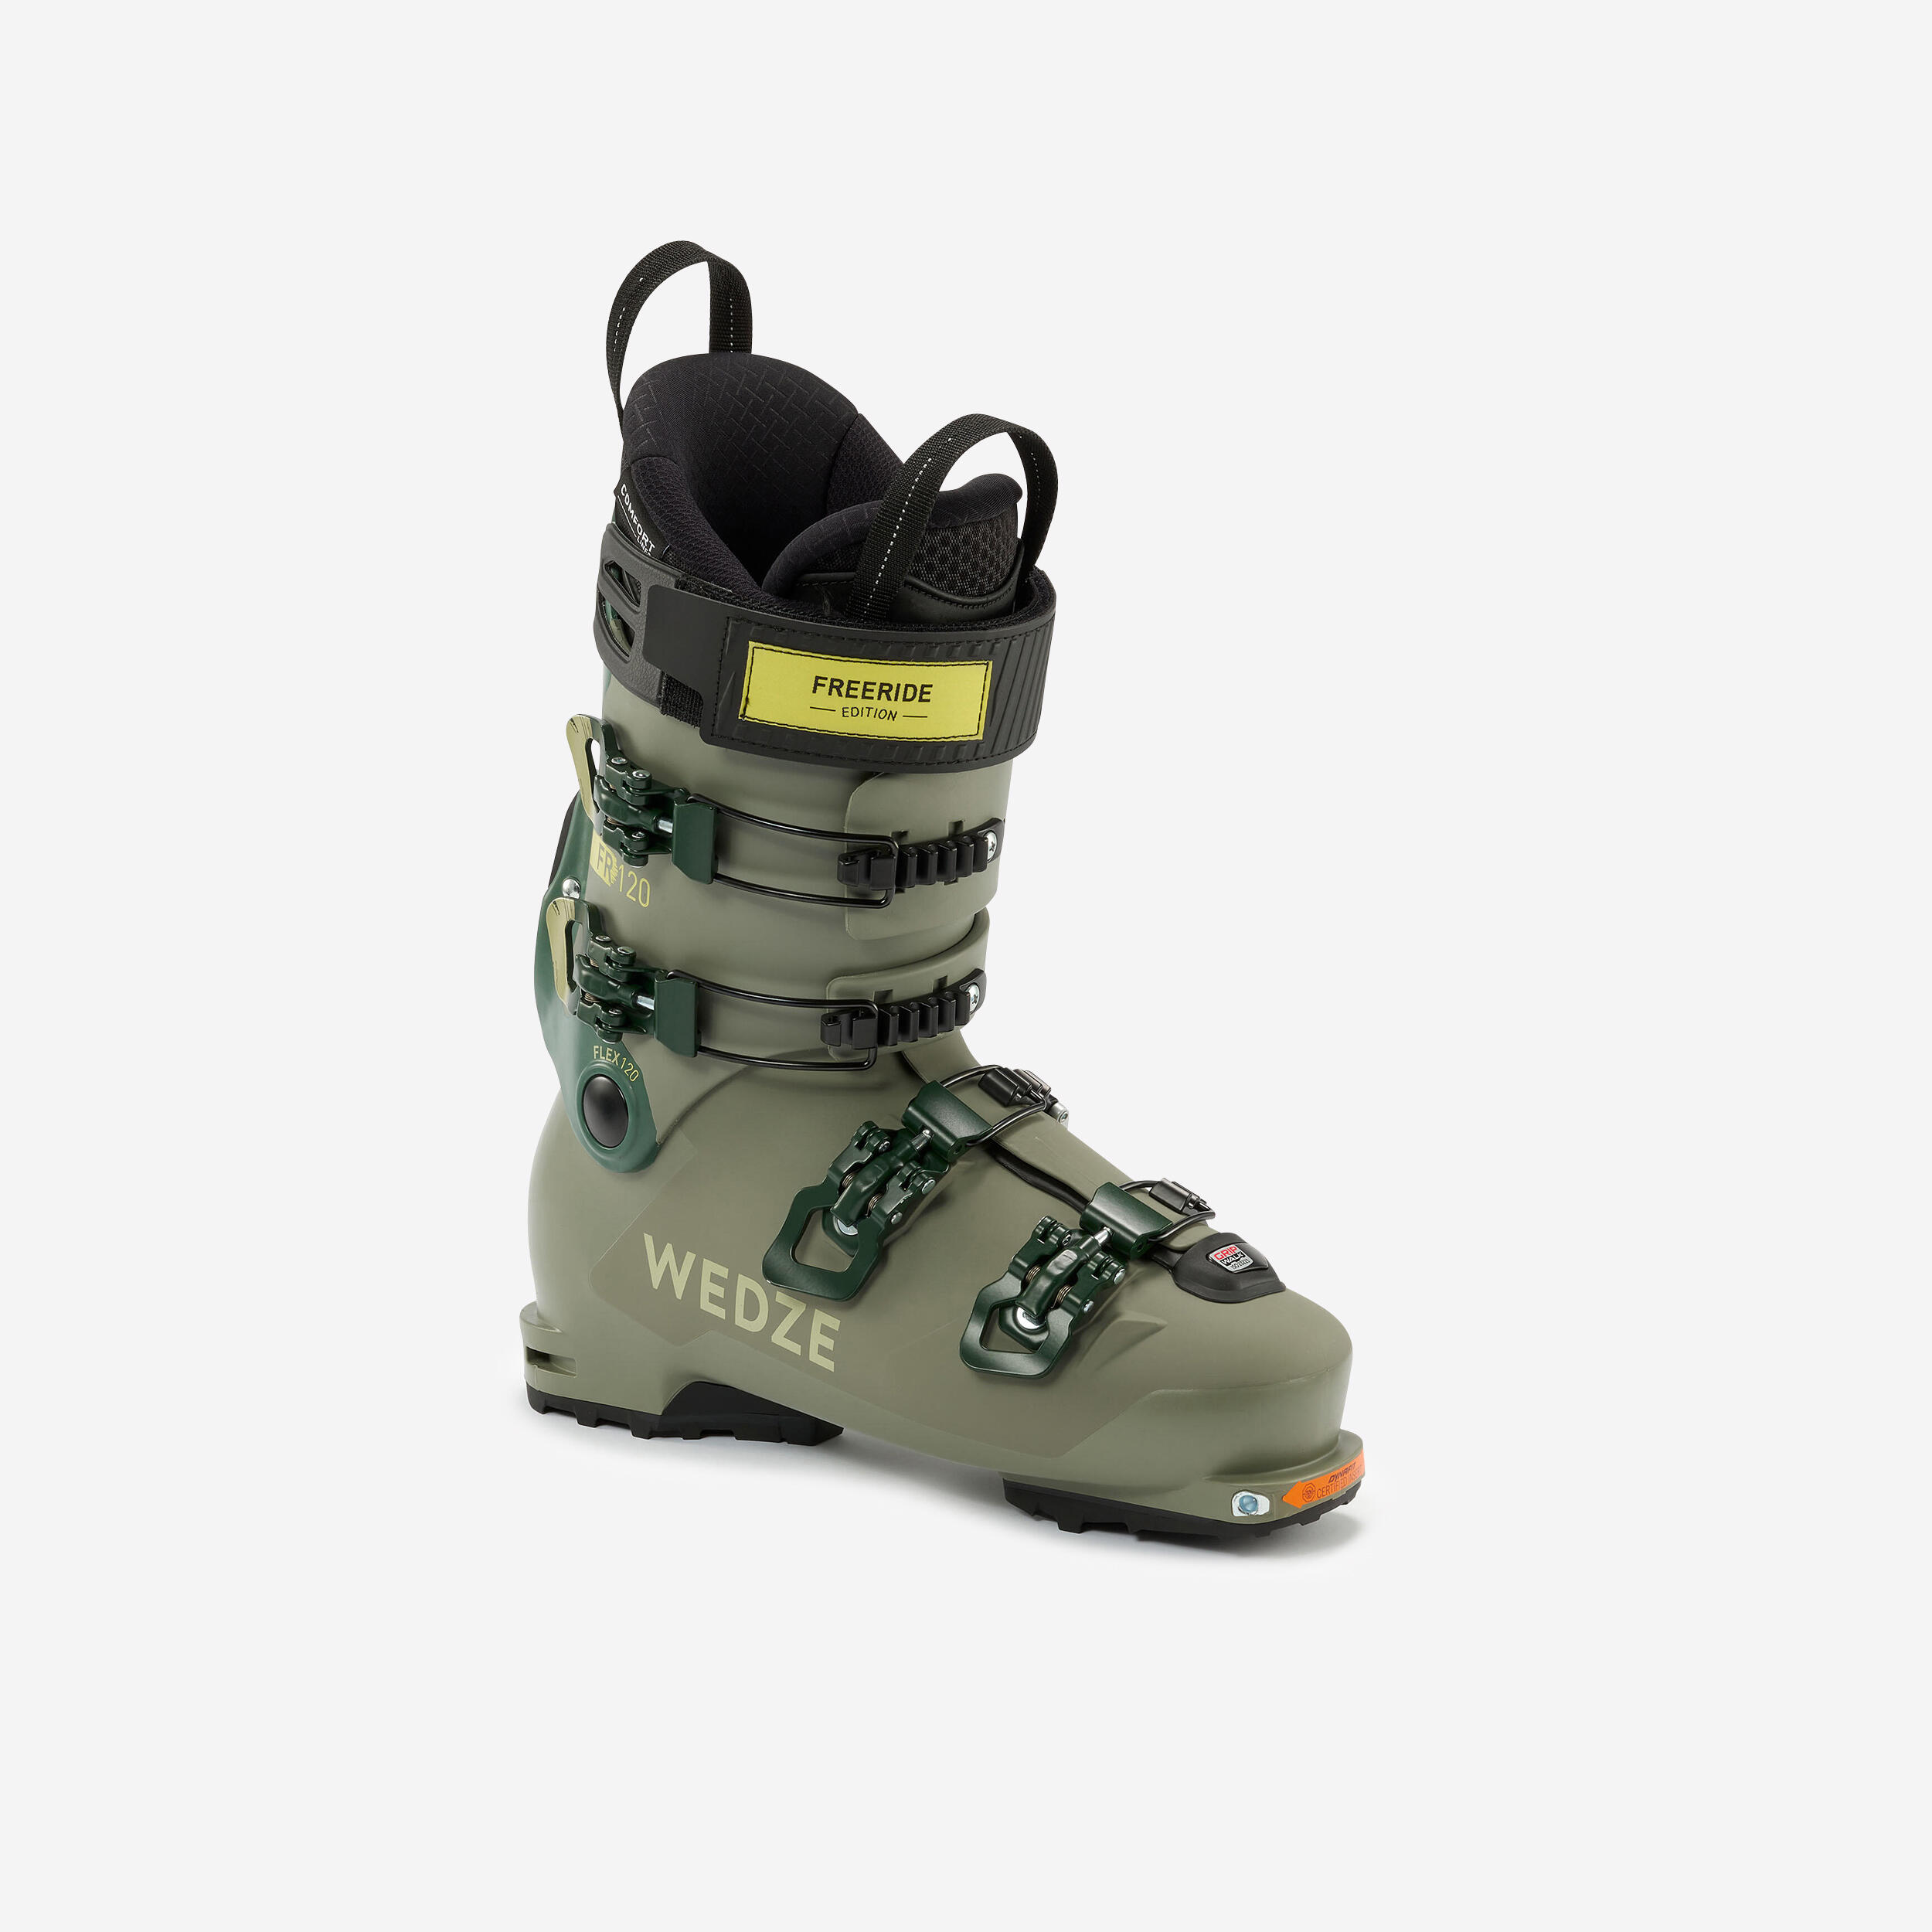 ADULT FREERIDE FREE TOURING SKI BOOTS - FR120 1/14